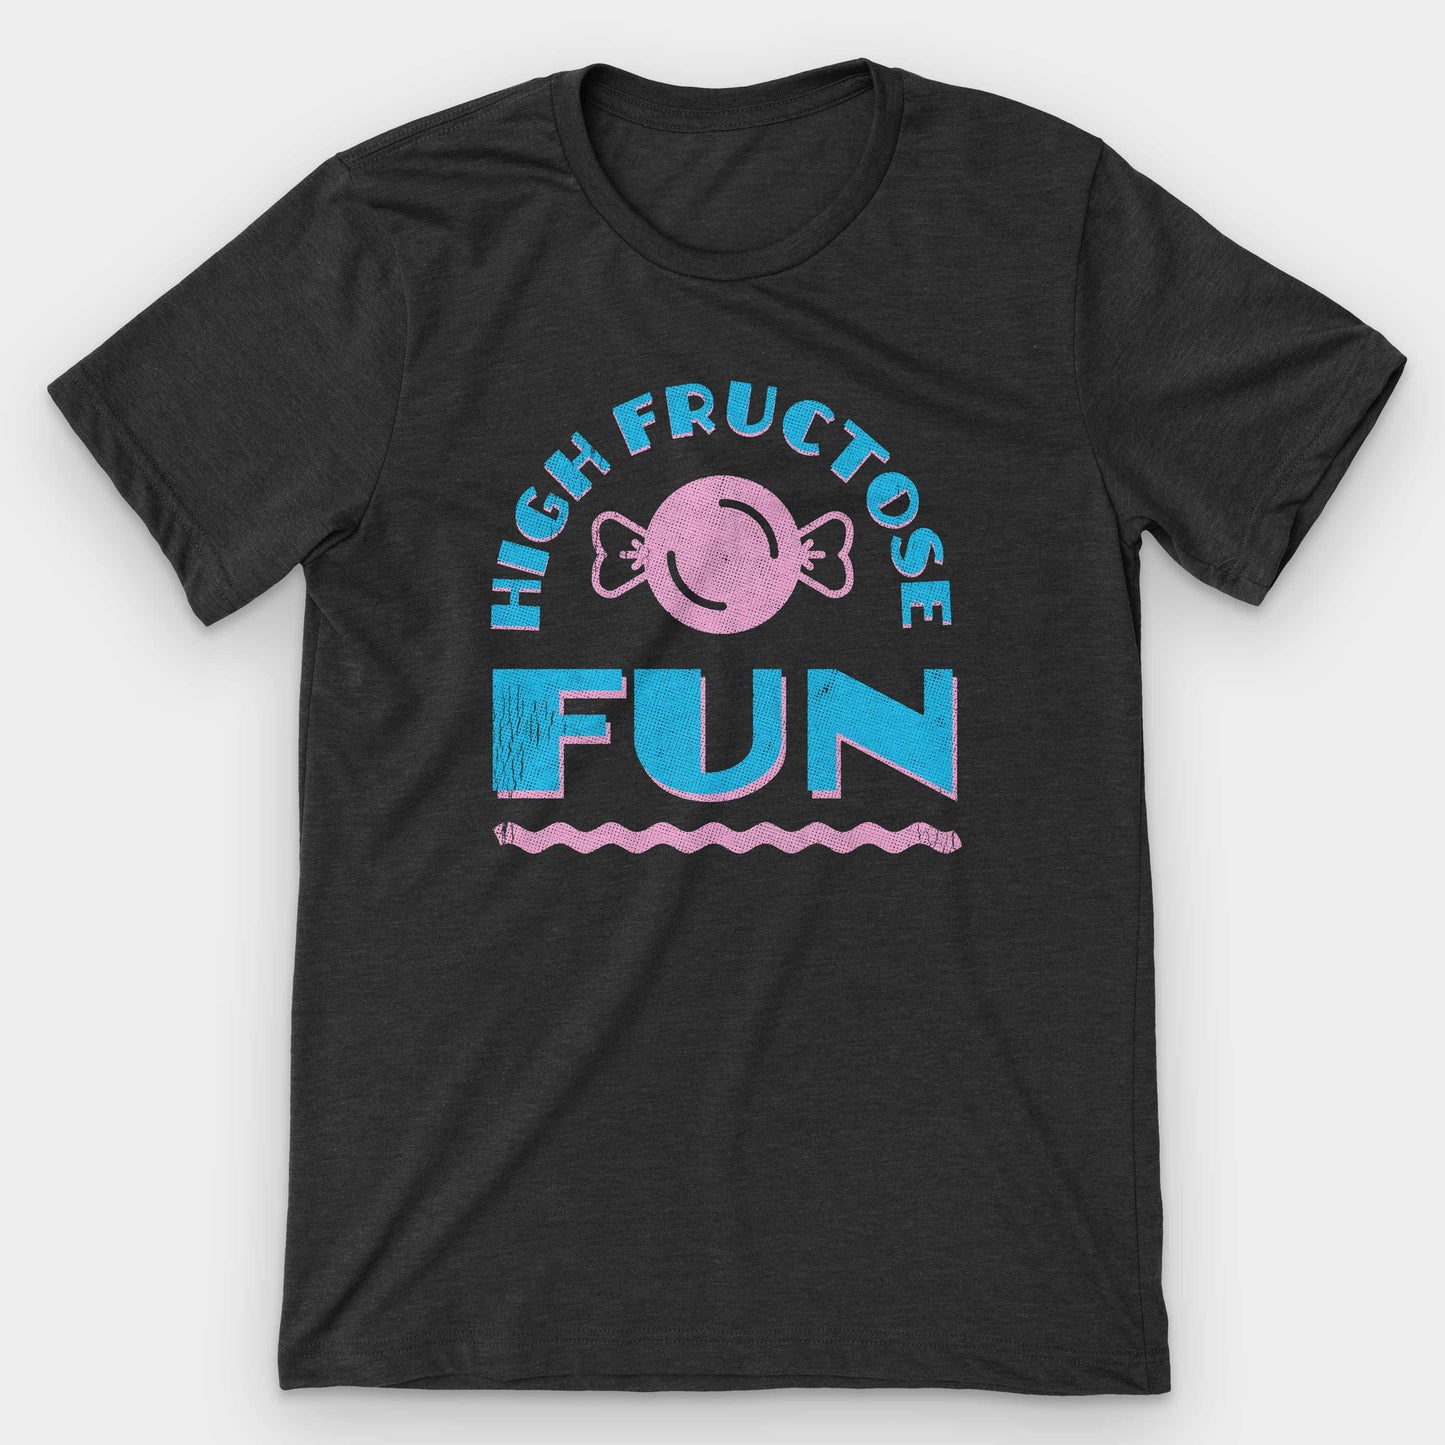 Black Heather High Fructose Fun Graphic T-Shirt by Snaxtime